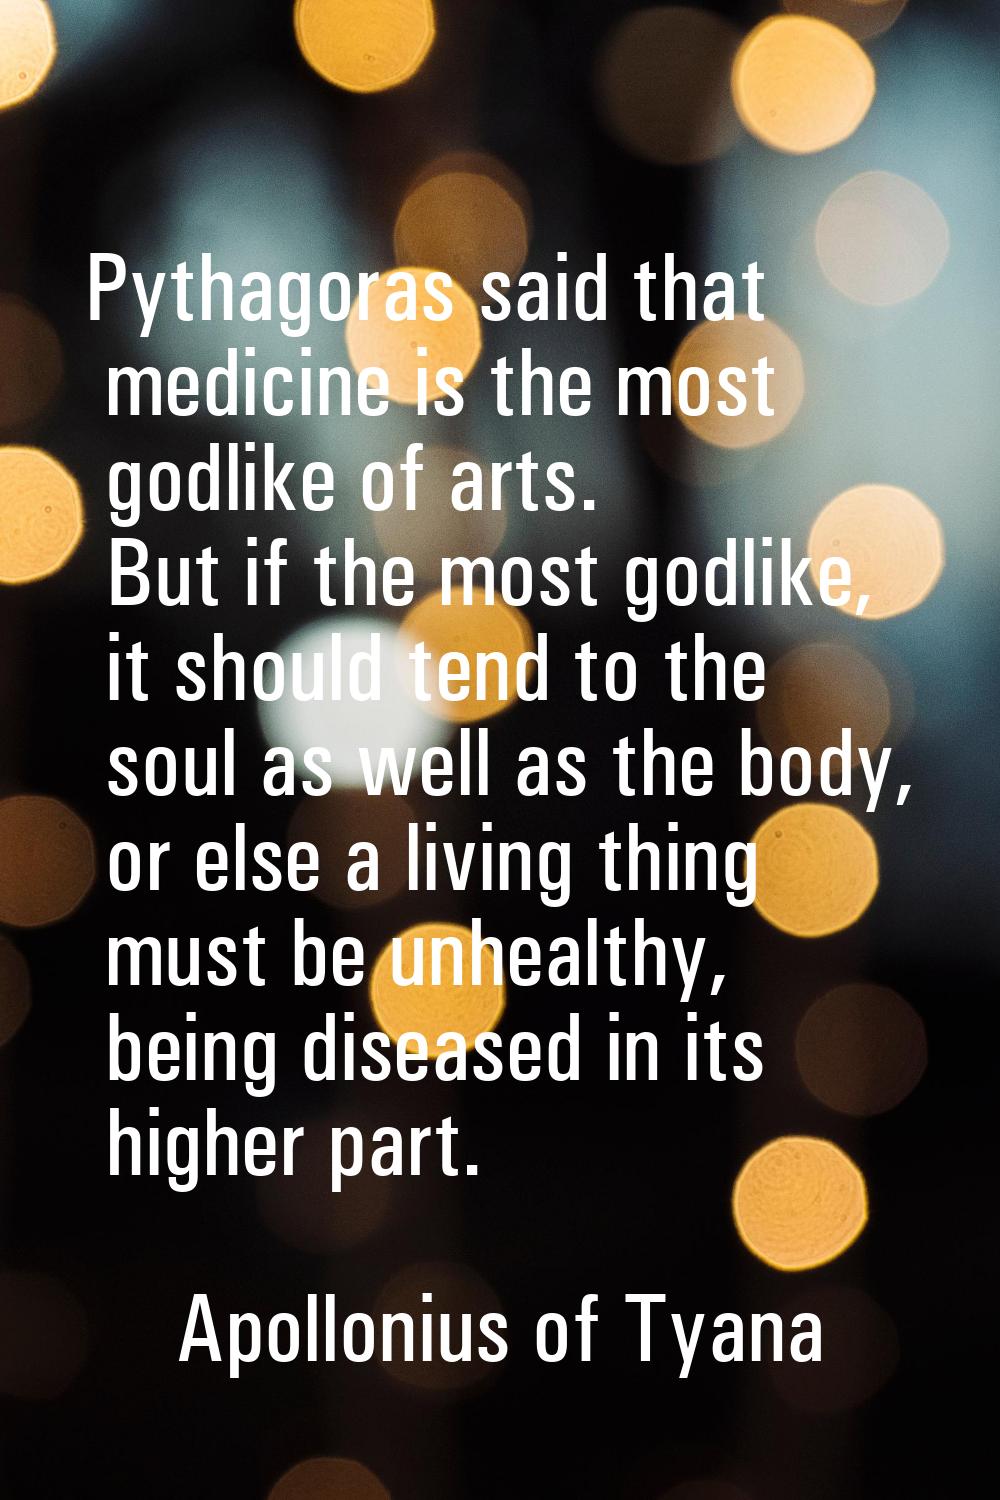 Pythagoras said that medicine is the most godlike of arts. But if the most godlike, it should tend 